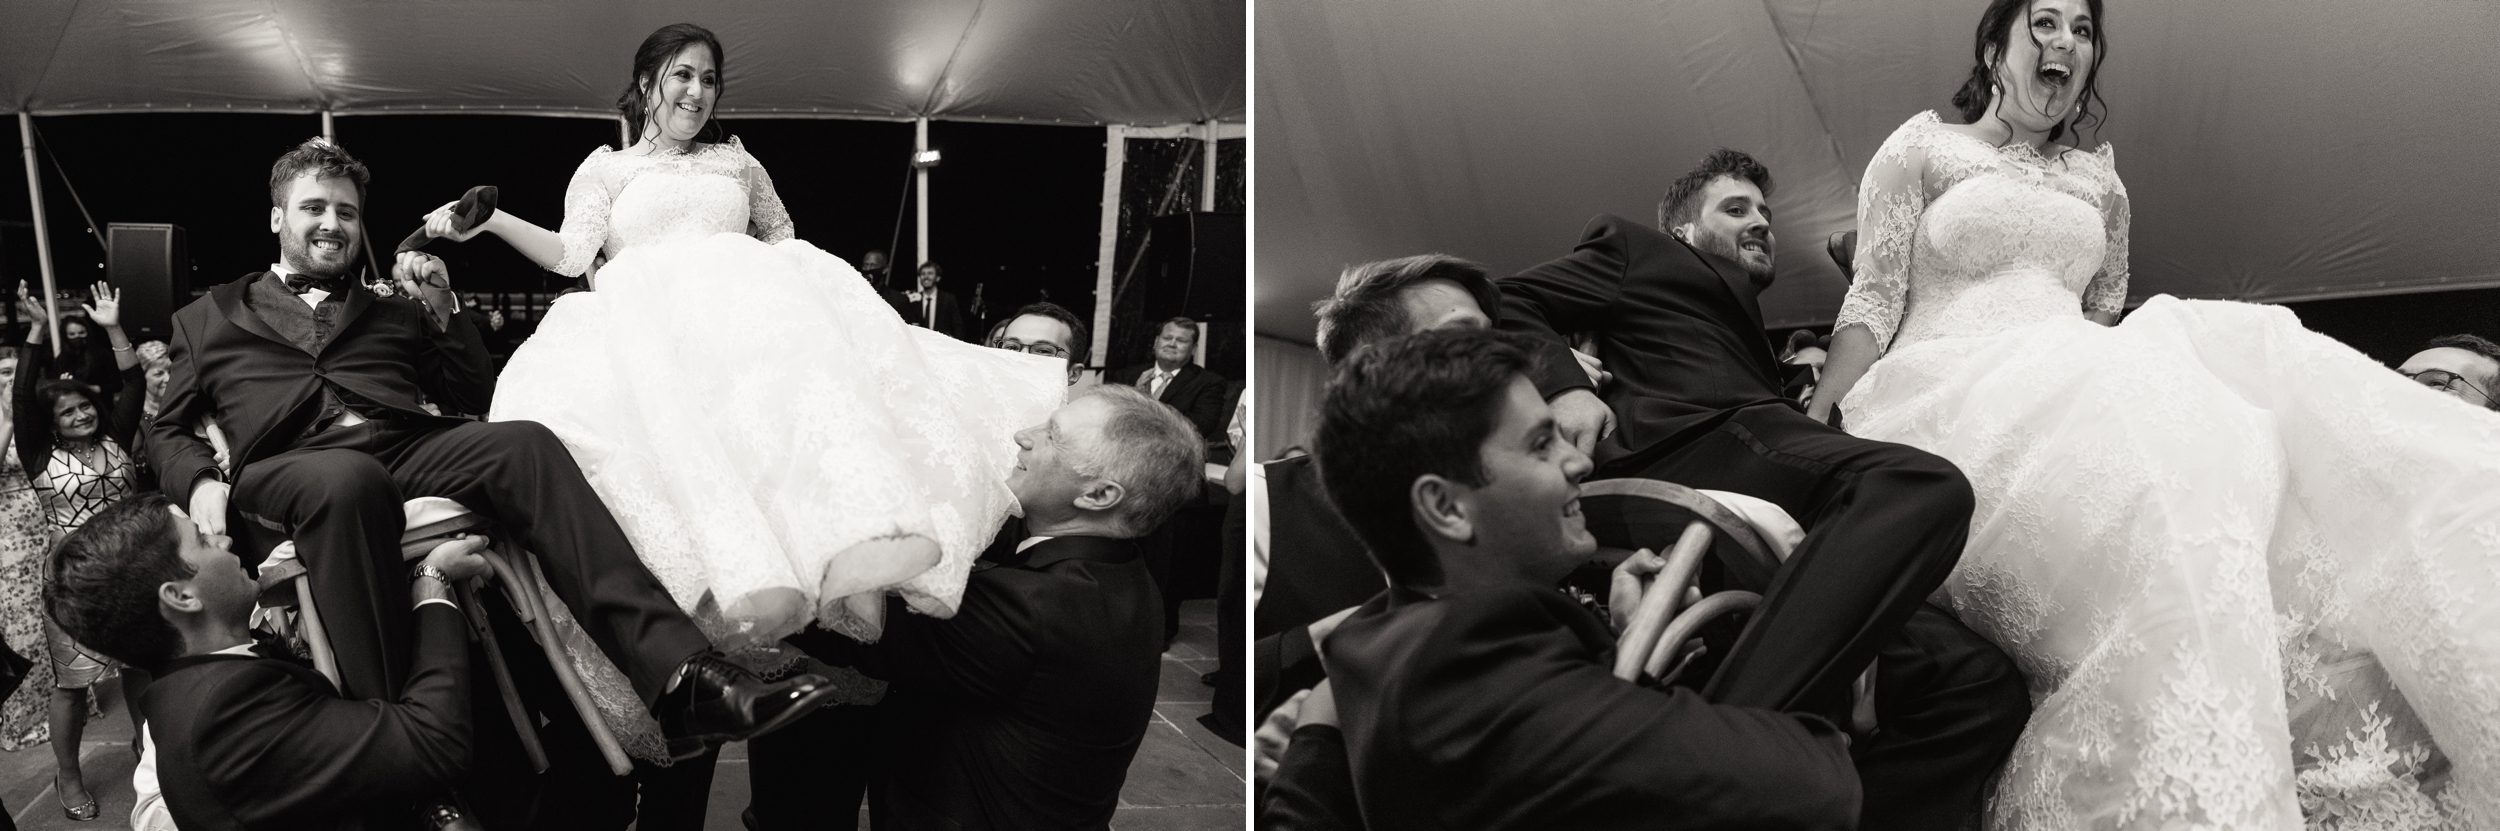 wedding guest lifting up bride and groom on chairs